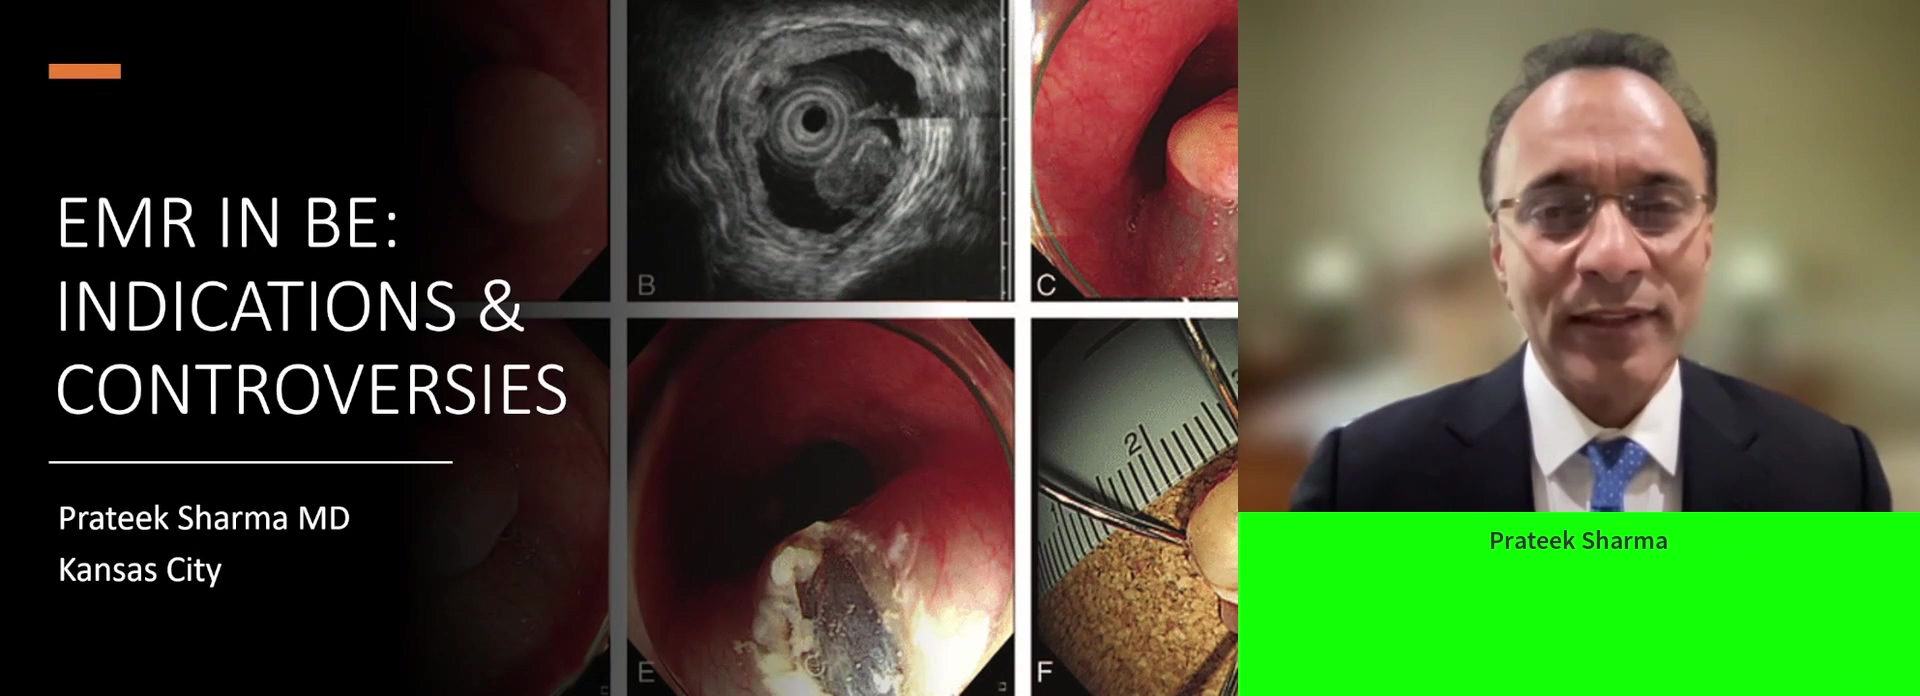 Endoscopic mucosal resection in Barrett: Indications and controversies